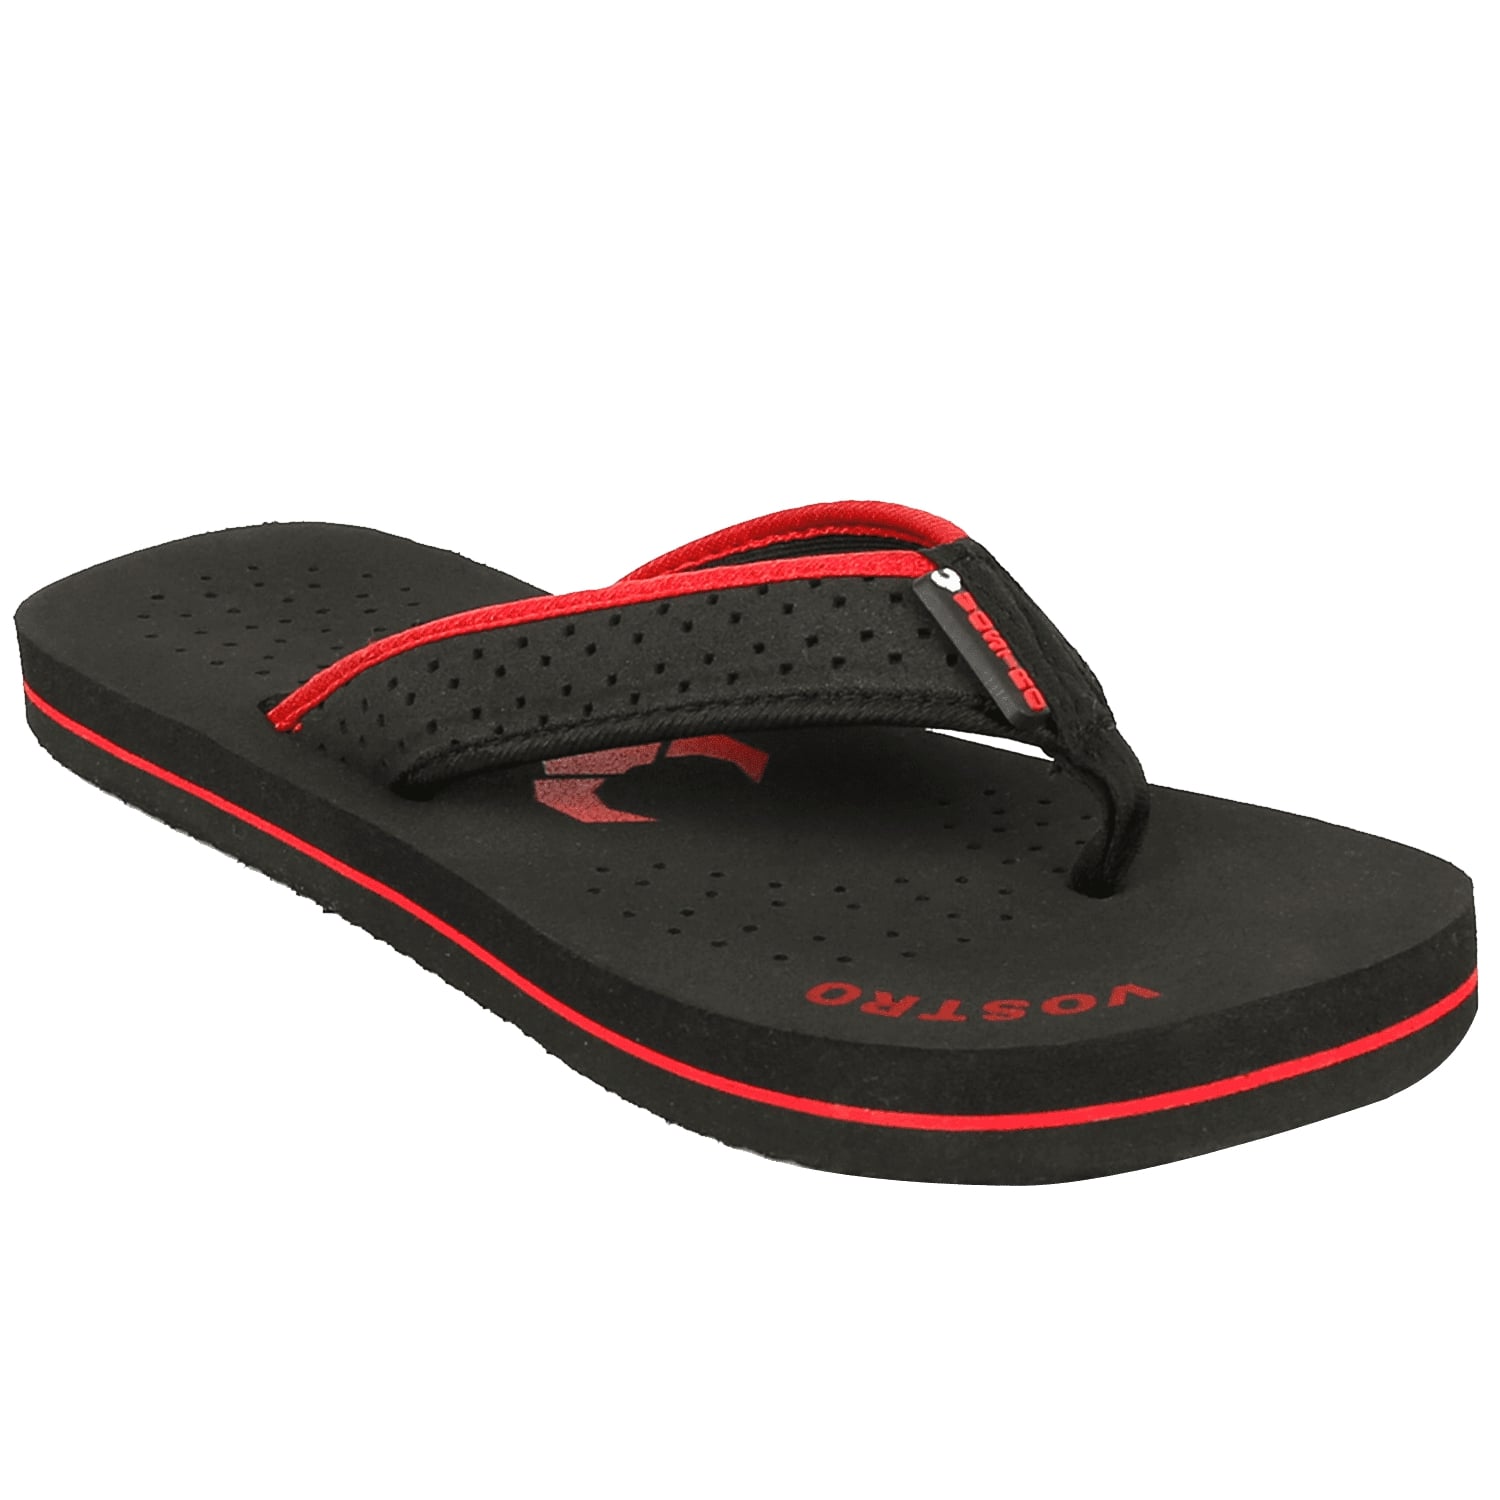 Buy Vostro Comfort-3 Black Men Flip Flops for men from our online storeHome and LifestyleFashion AccessoriesNoidaNoida Sector 16